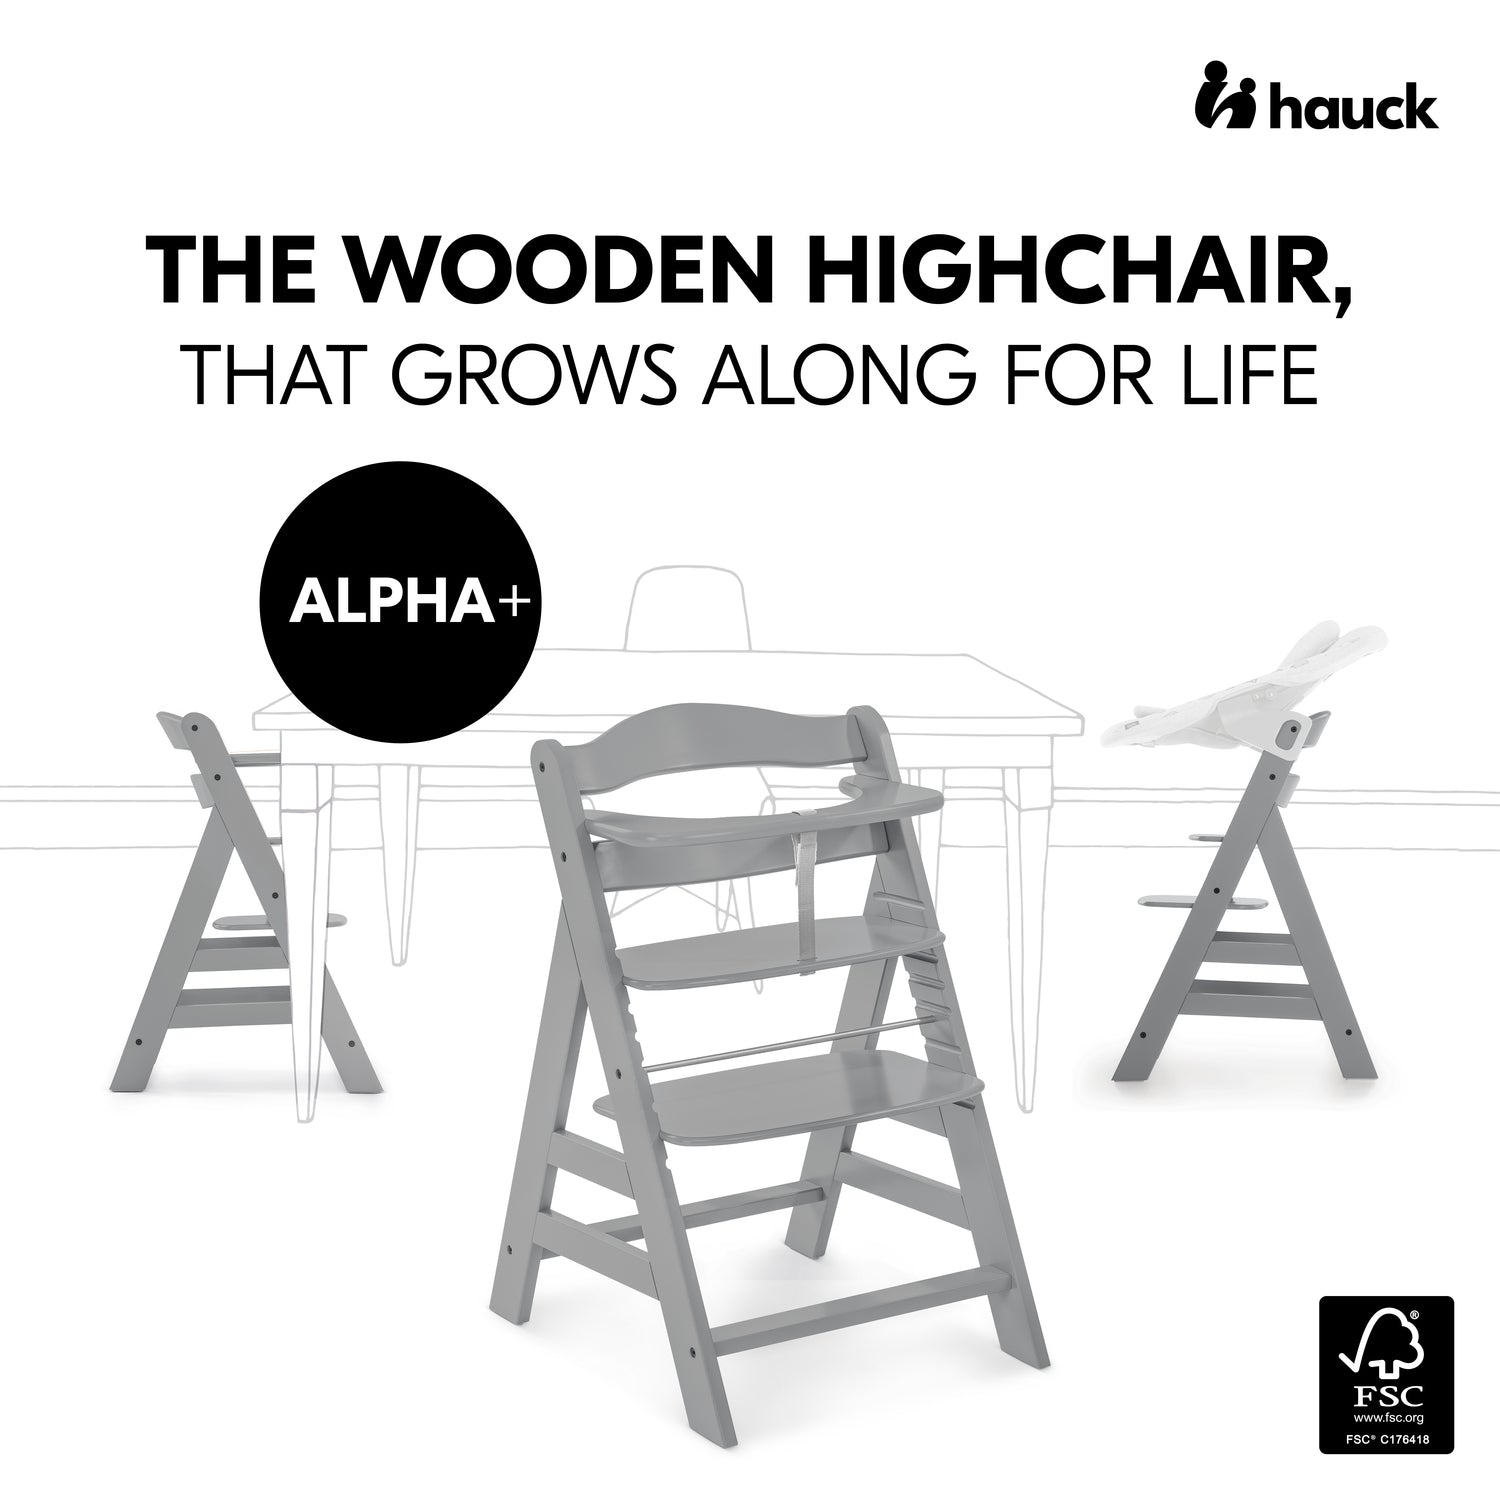 3 Alpha Chair Accessories Help the Transition from Birth through Adult